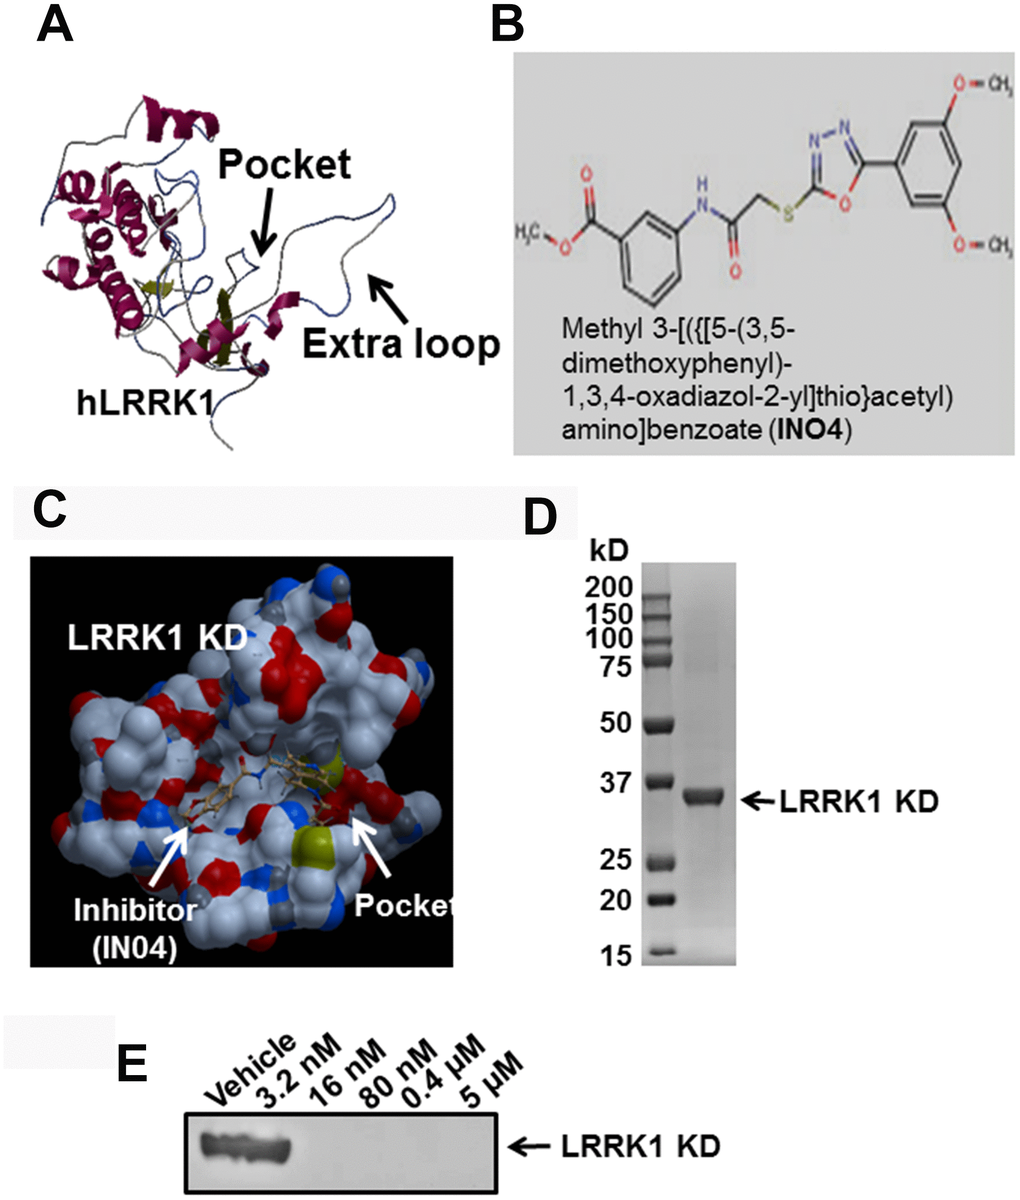 Small molecular inhibitor IN04 binds to the predicted active pocket of hLRRK1 kinase domain. (A) Predicted structure of hLRRK1 kinase domain with an active pocket. (B) A molecular structure of the potential LRRK1 inhibitor IN04. (C) A potential small molecular weight inhibitor docks to the active pocket of hLRRK1 KD. (D) Purified 34 kD recombinant protein of hLRRK1 expressed in E. coli stained with Coomassie blue. (E) IN04 inhibits ATP binding to the LRRK1 KD, measured by an in vitro pulldown assay.